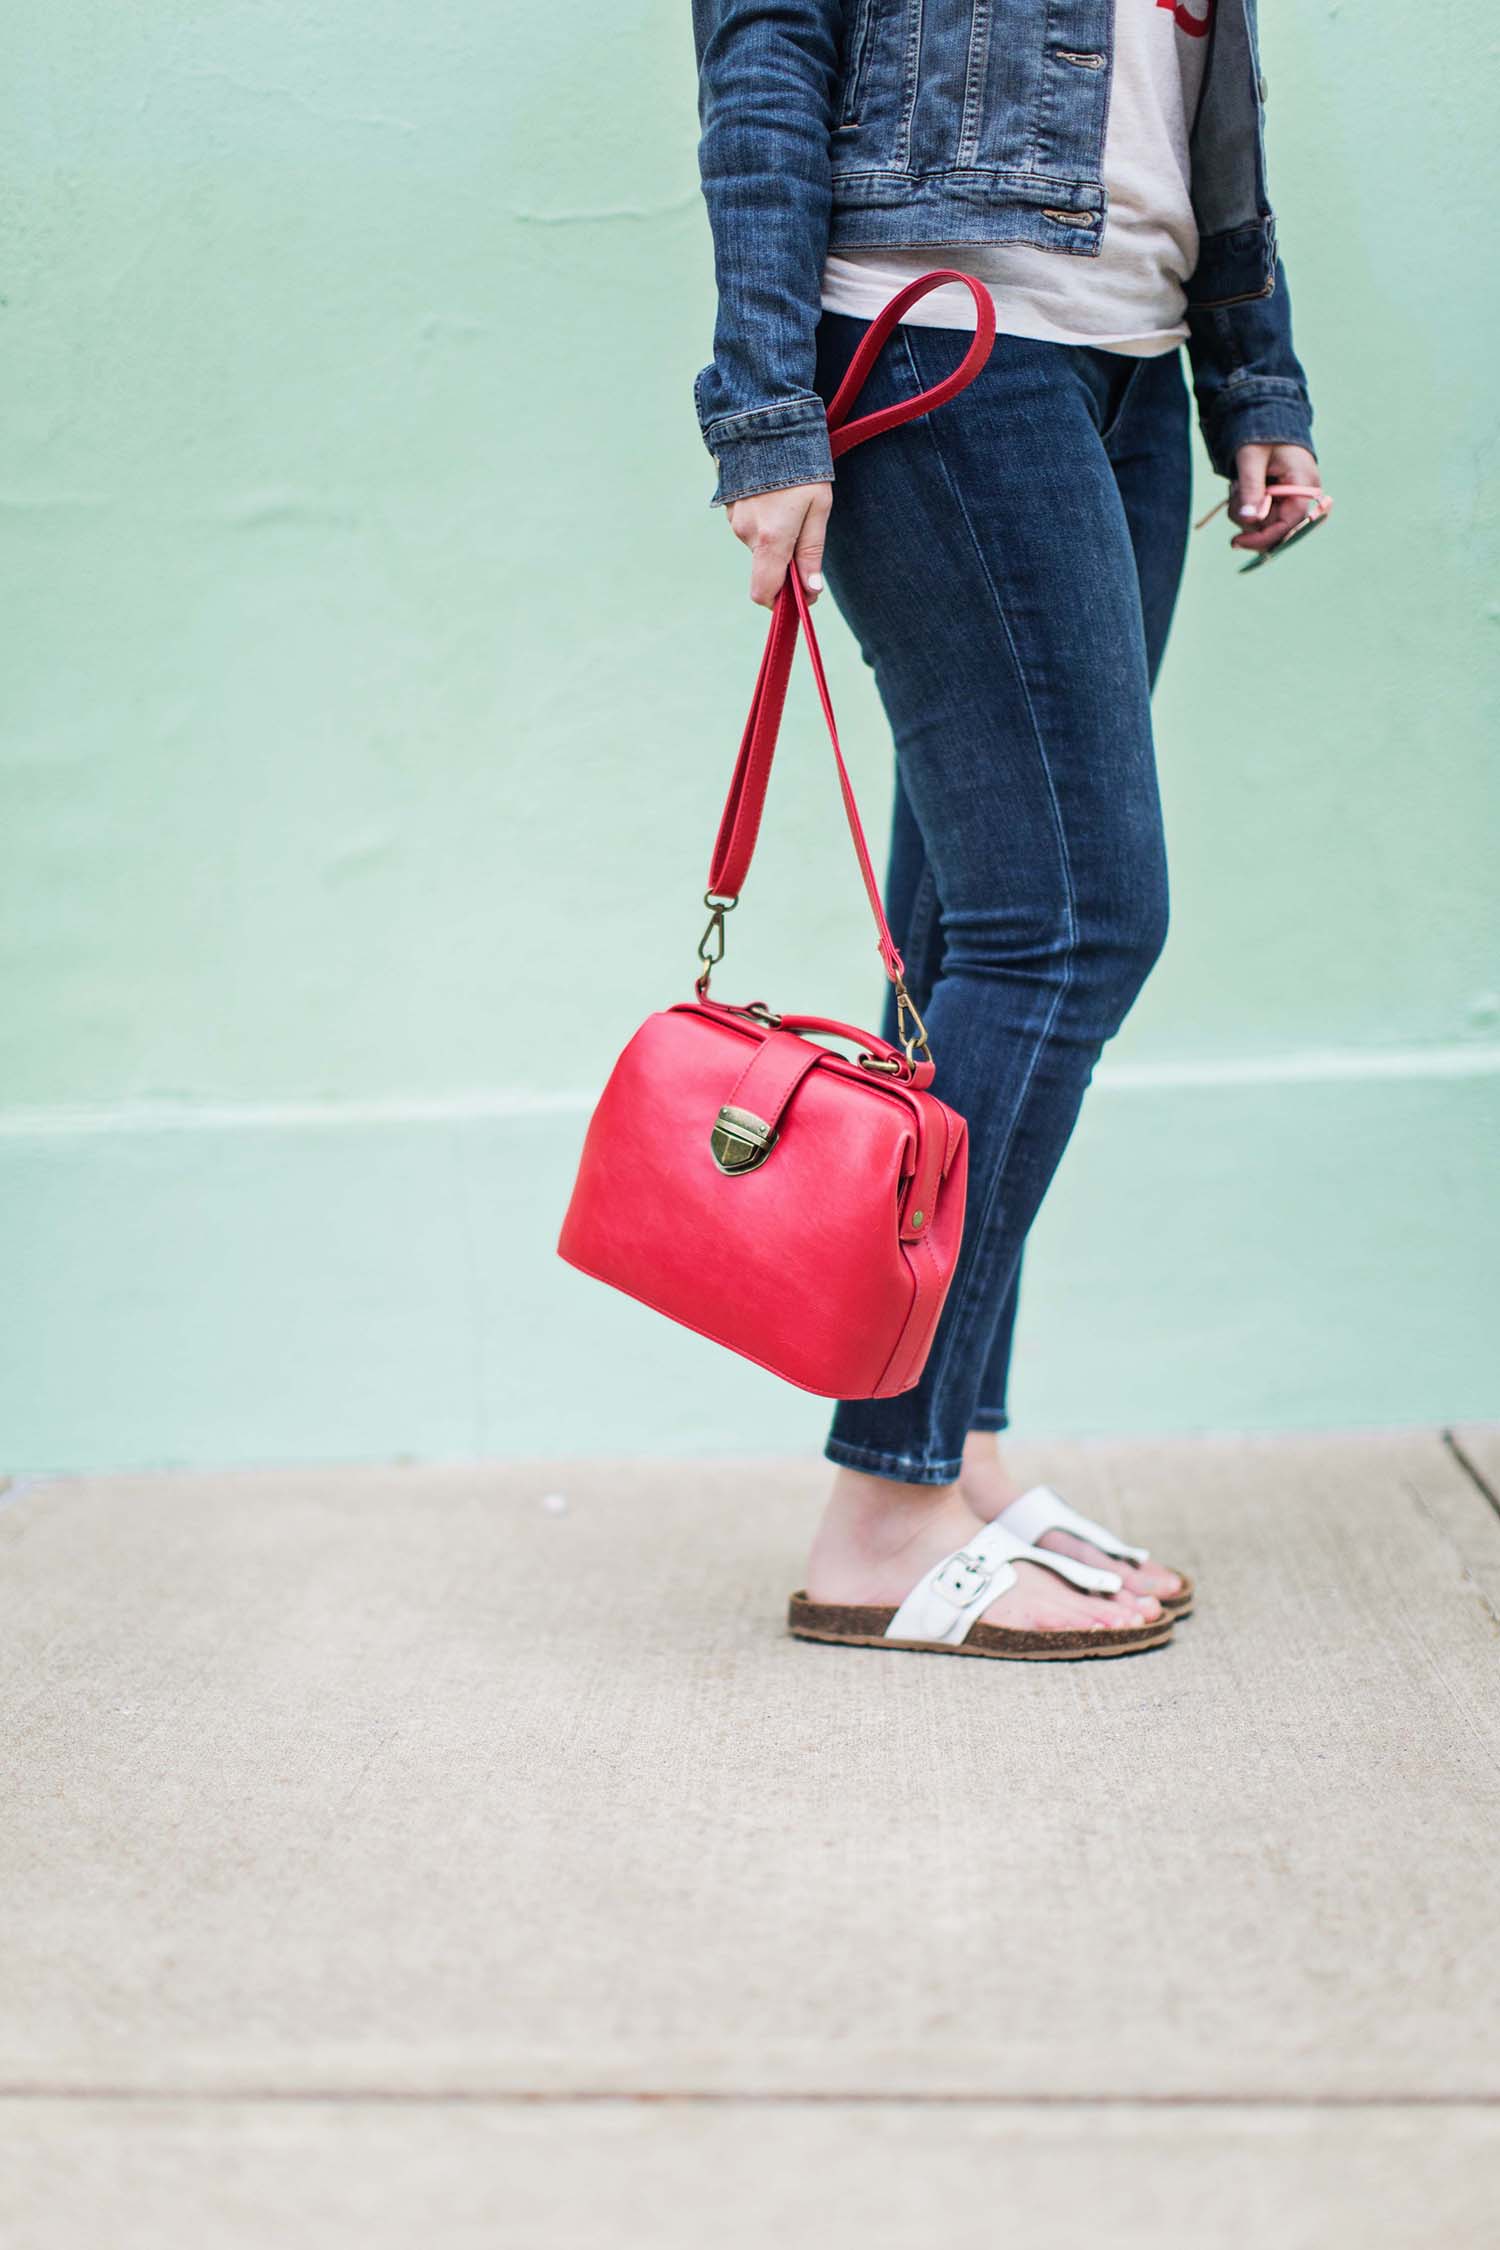 Red purse white sandals